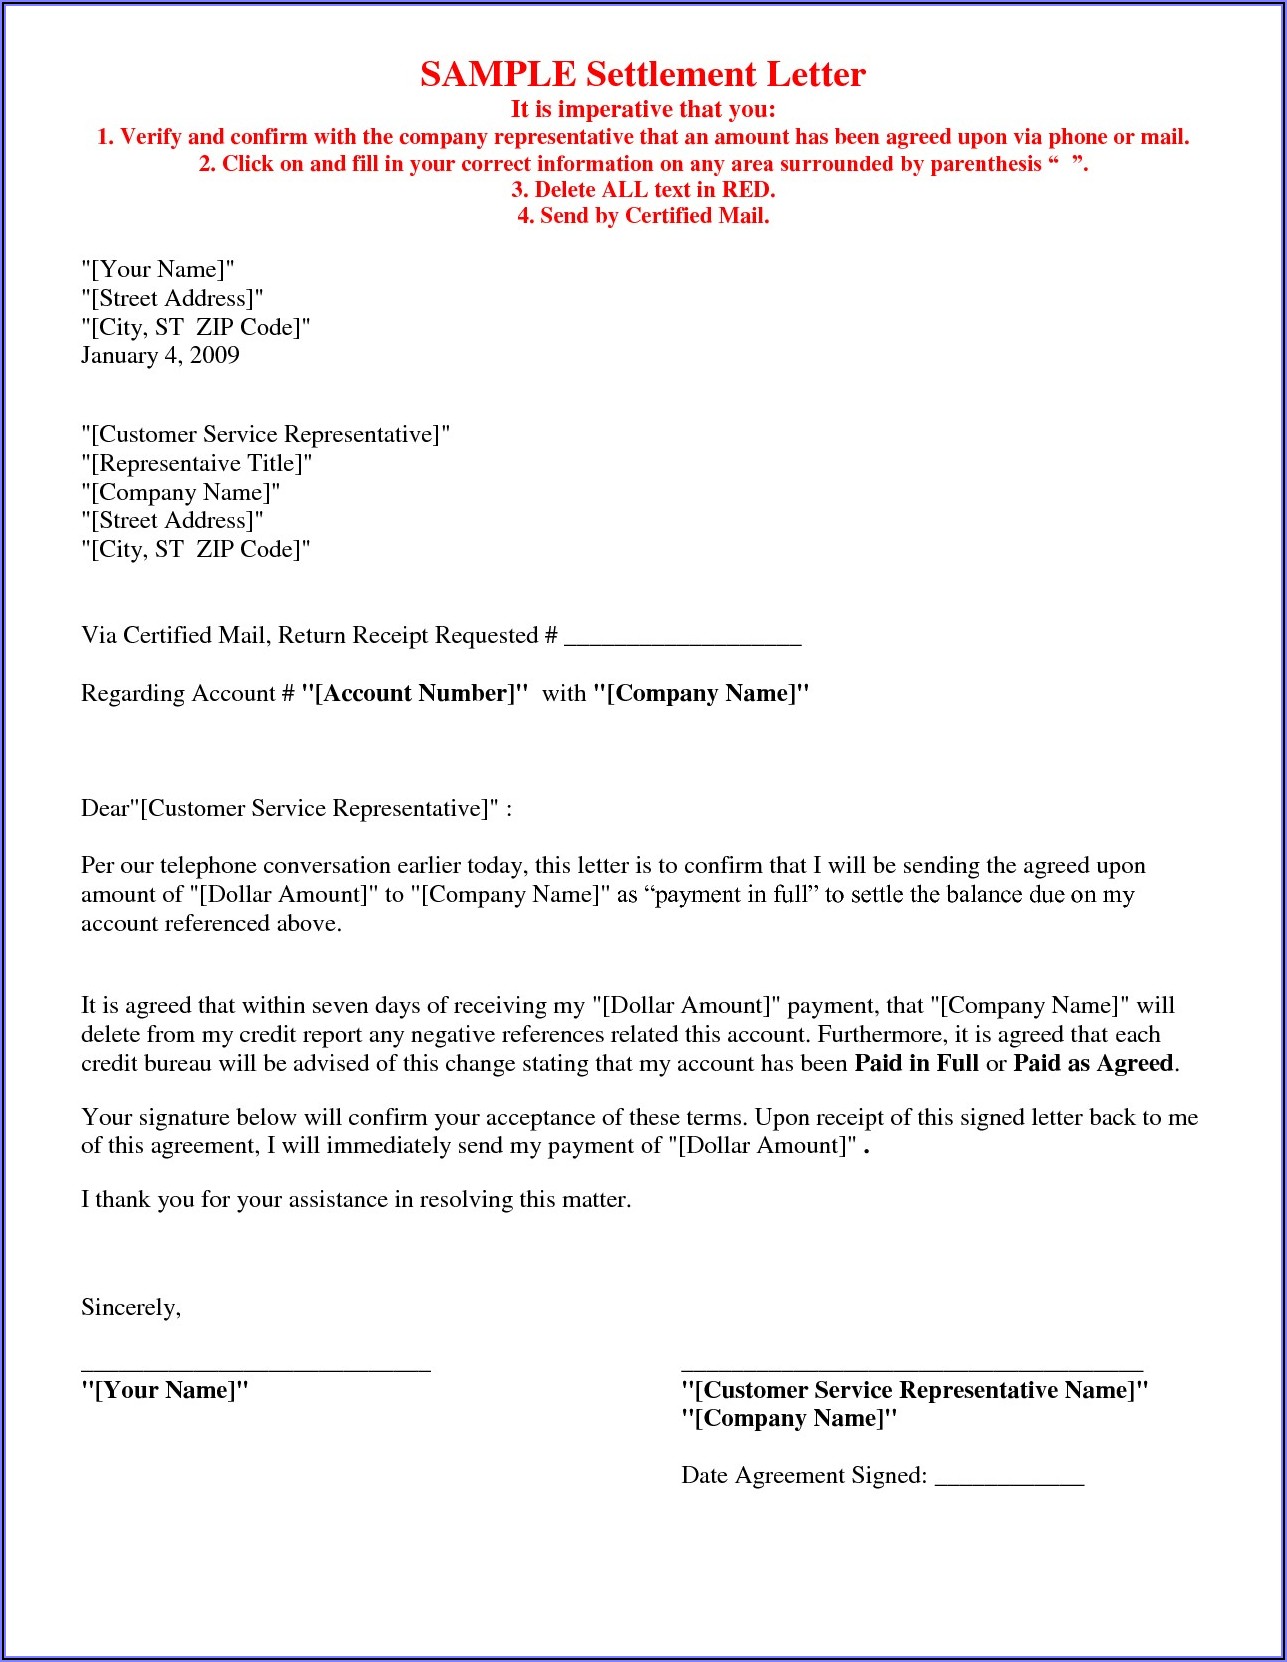 Mortgage Payoff Letter Format